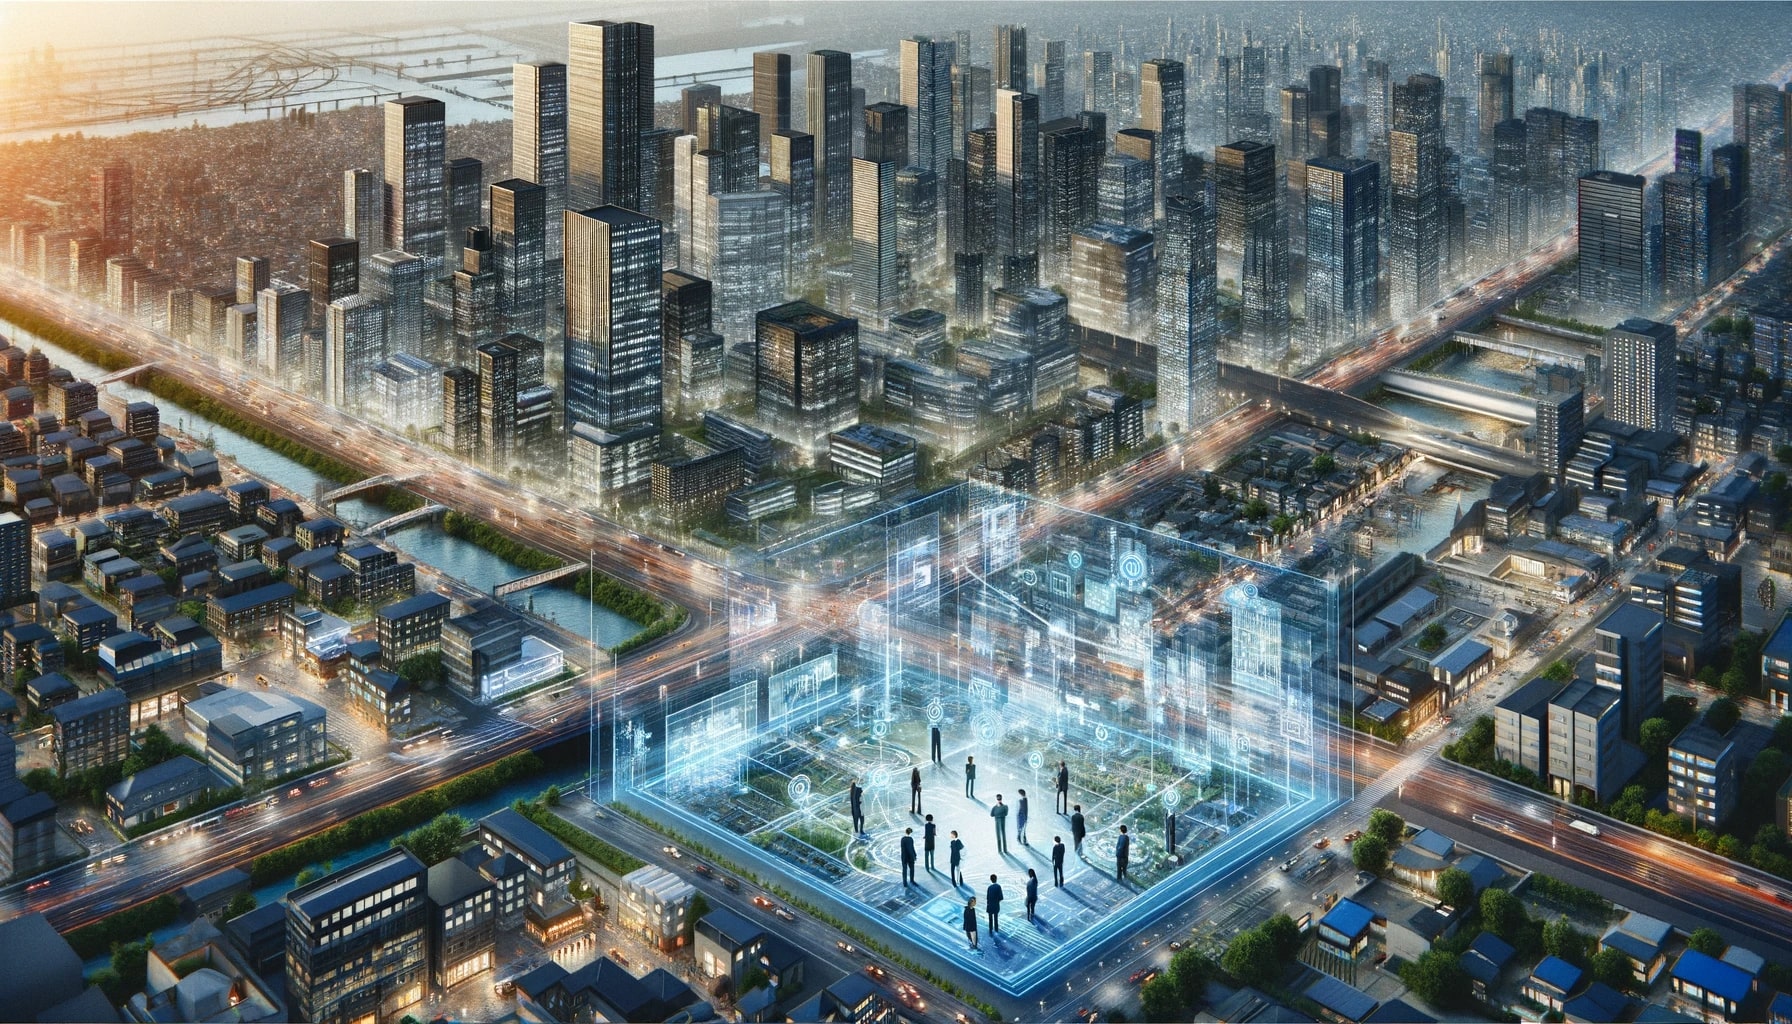 A photorealistic image depicting 'Digital Twins in Urban Planning'. The scene is a bustling modern cityscape, with skyscrapers, roads, and public spaces. Overlaying this cityscape is a semi-transparent digital layer, showing detailed digital models of buildings, transportation networks, and utility systems, symbolizing Building Information Modeling (BIM) in action.